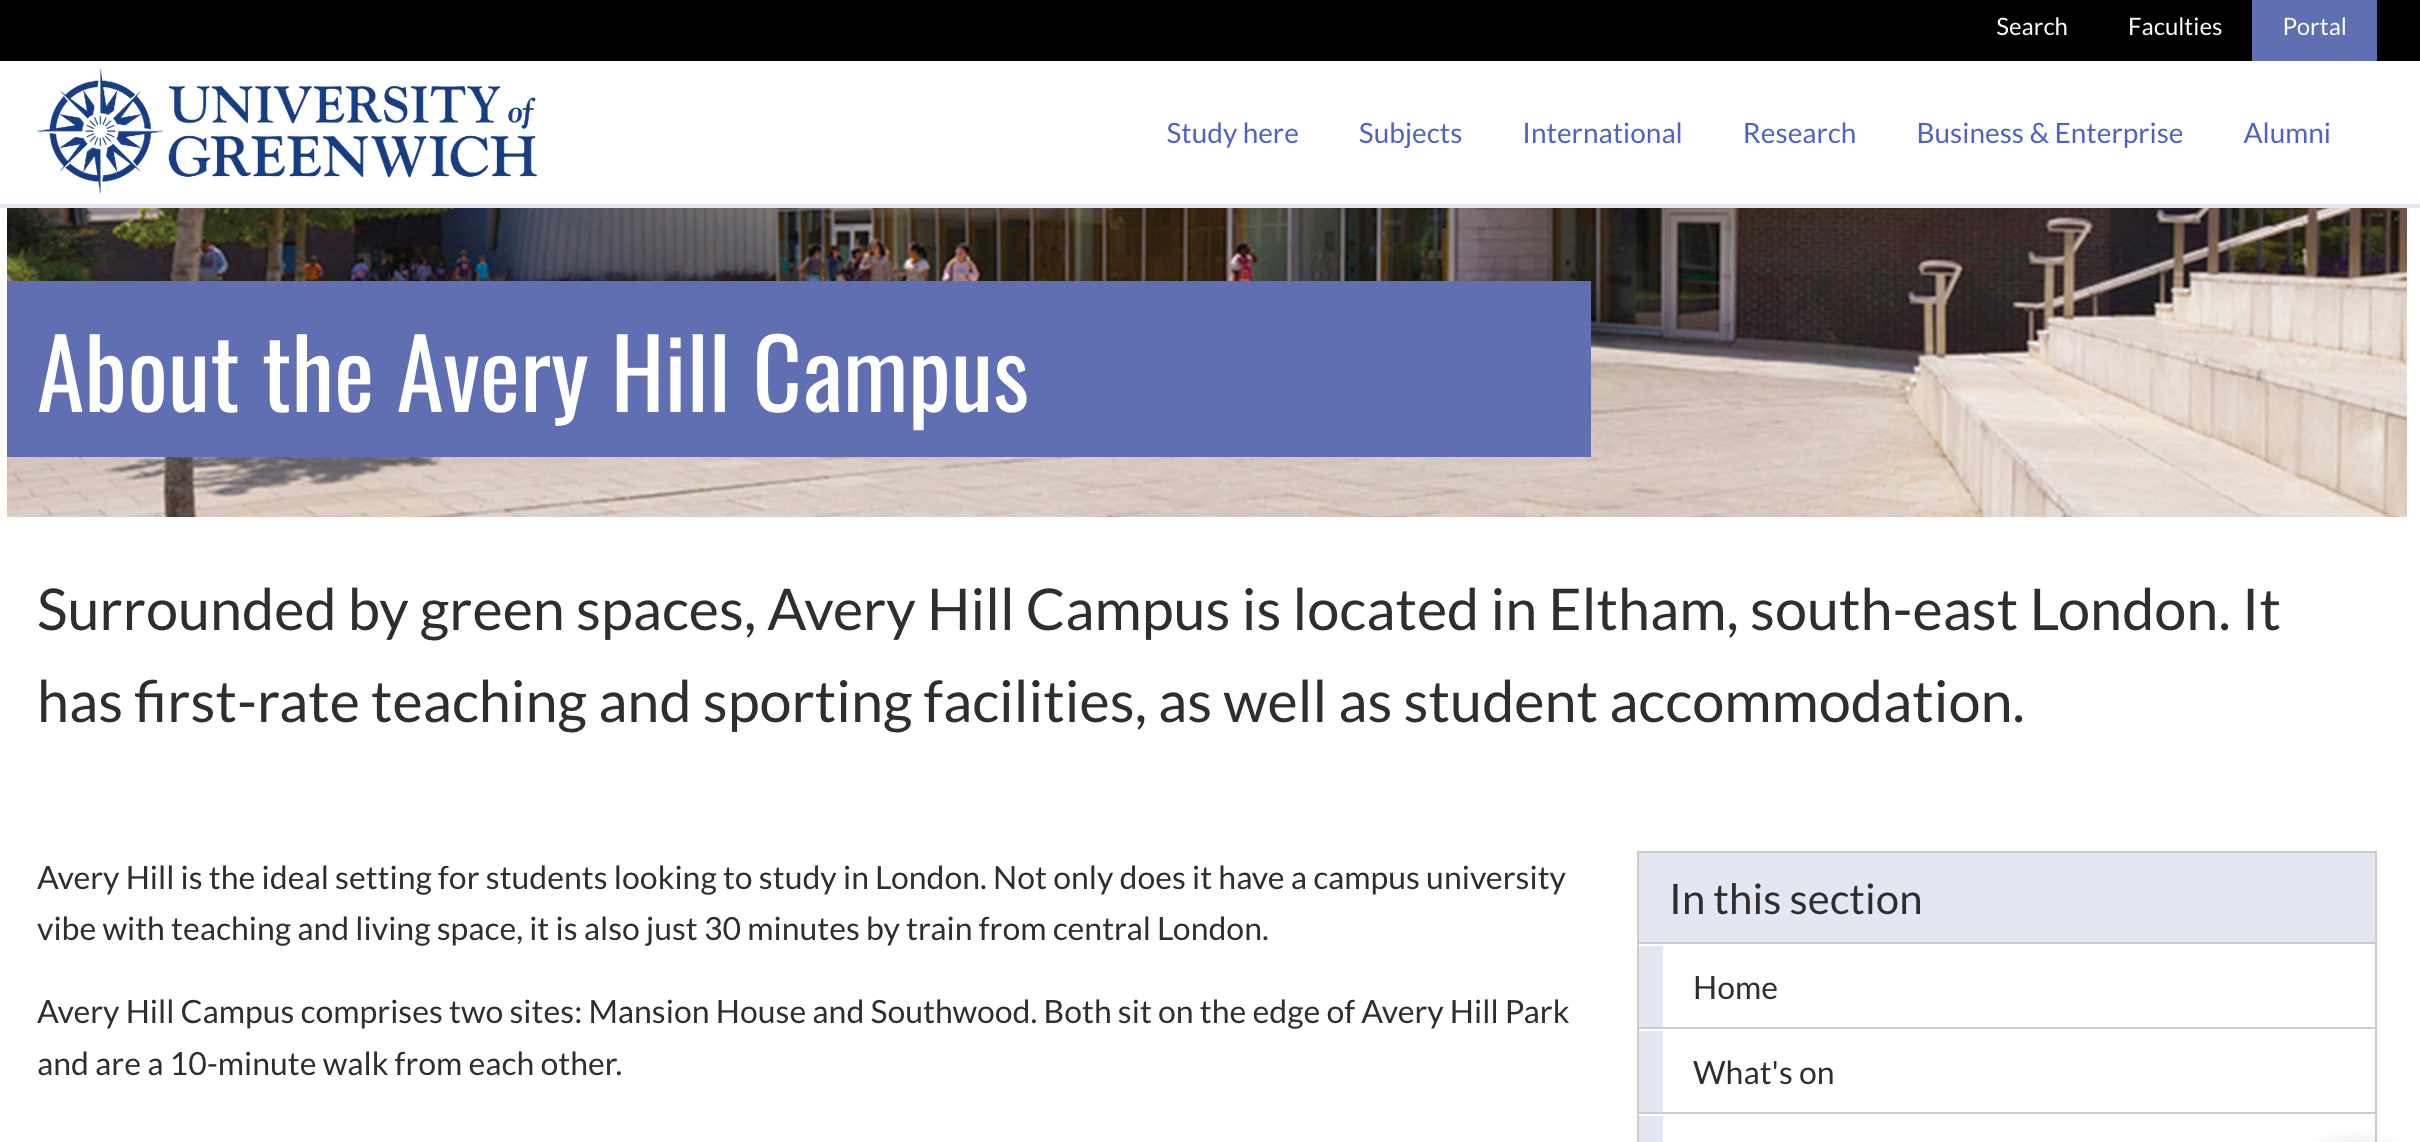 Avery Hill Campus